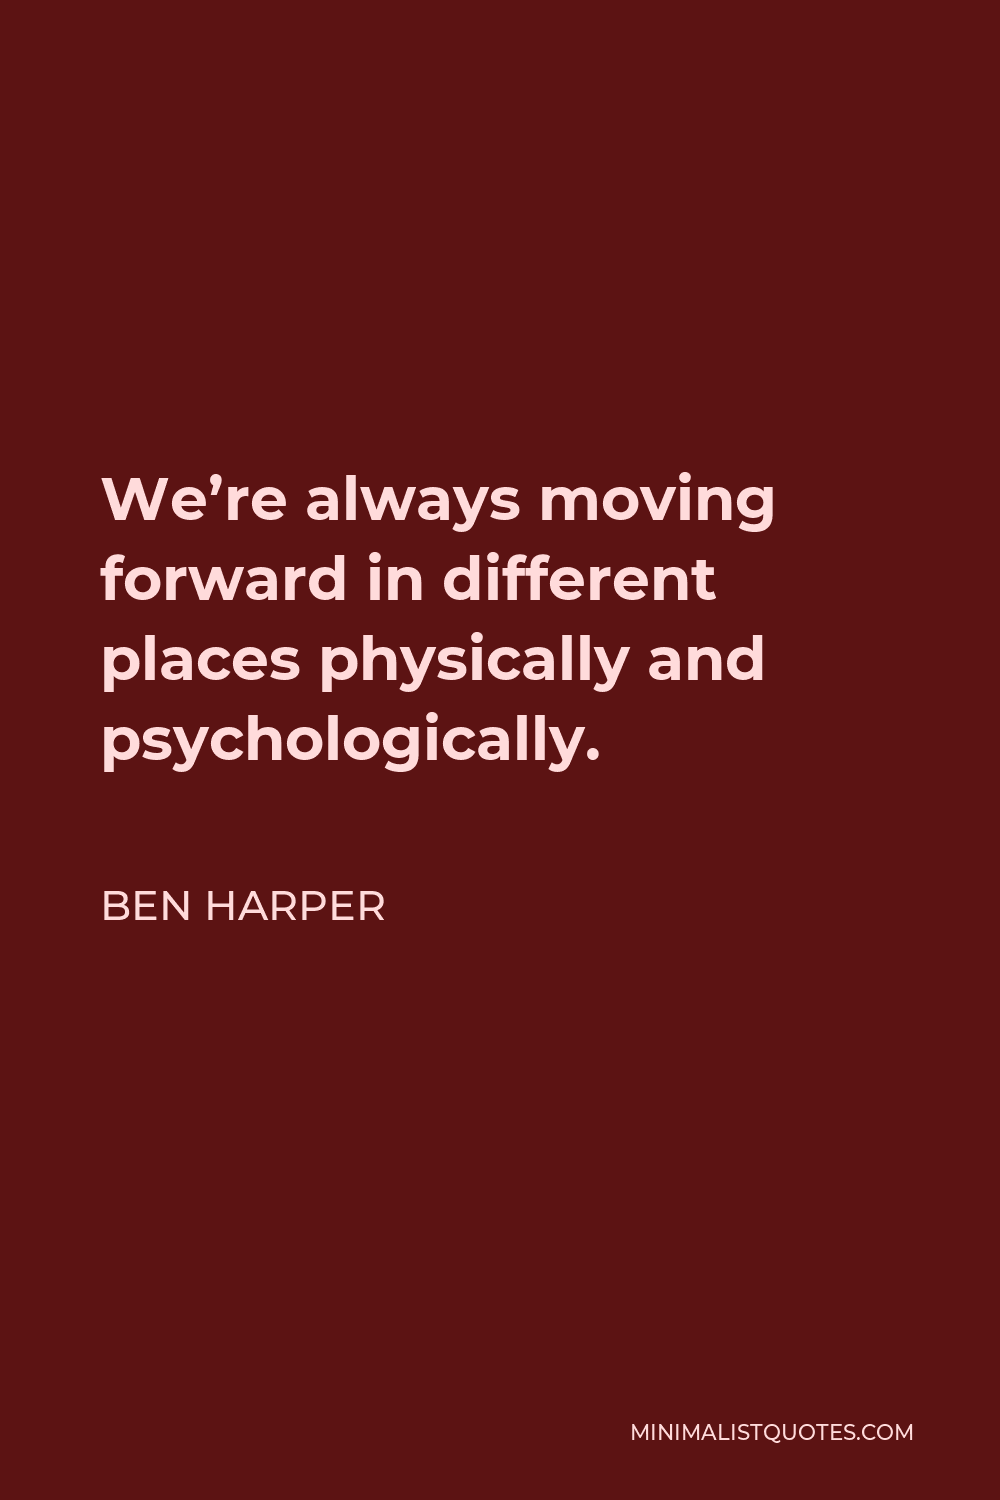 Ben Harper Quote - We’re always moving forward in different places physically and psychologically.